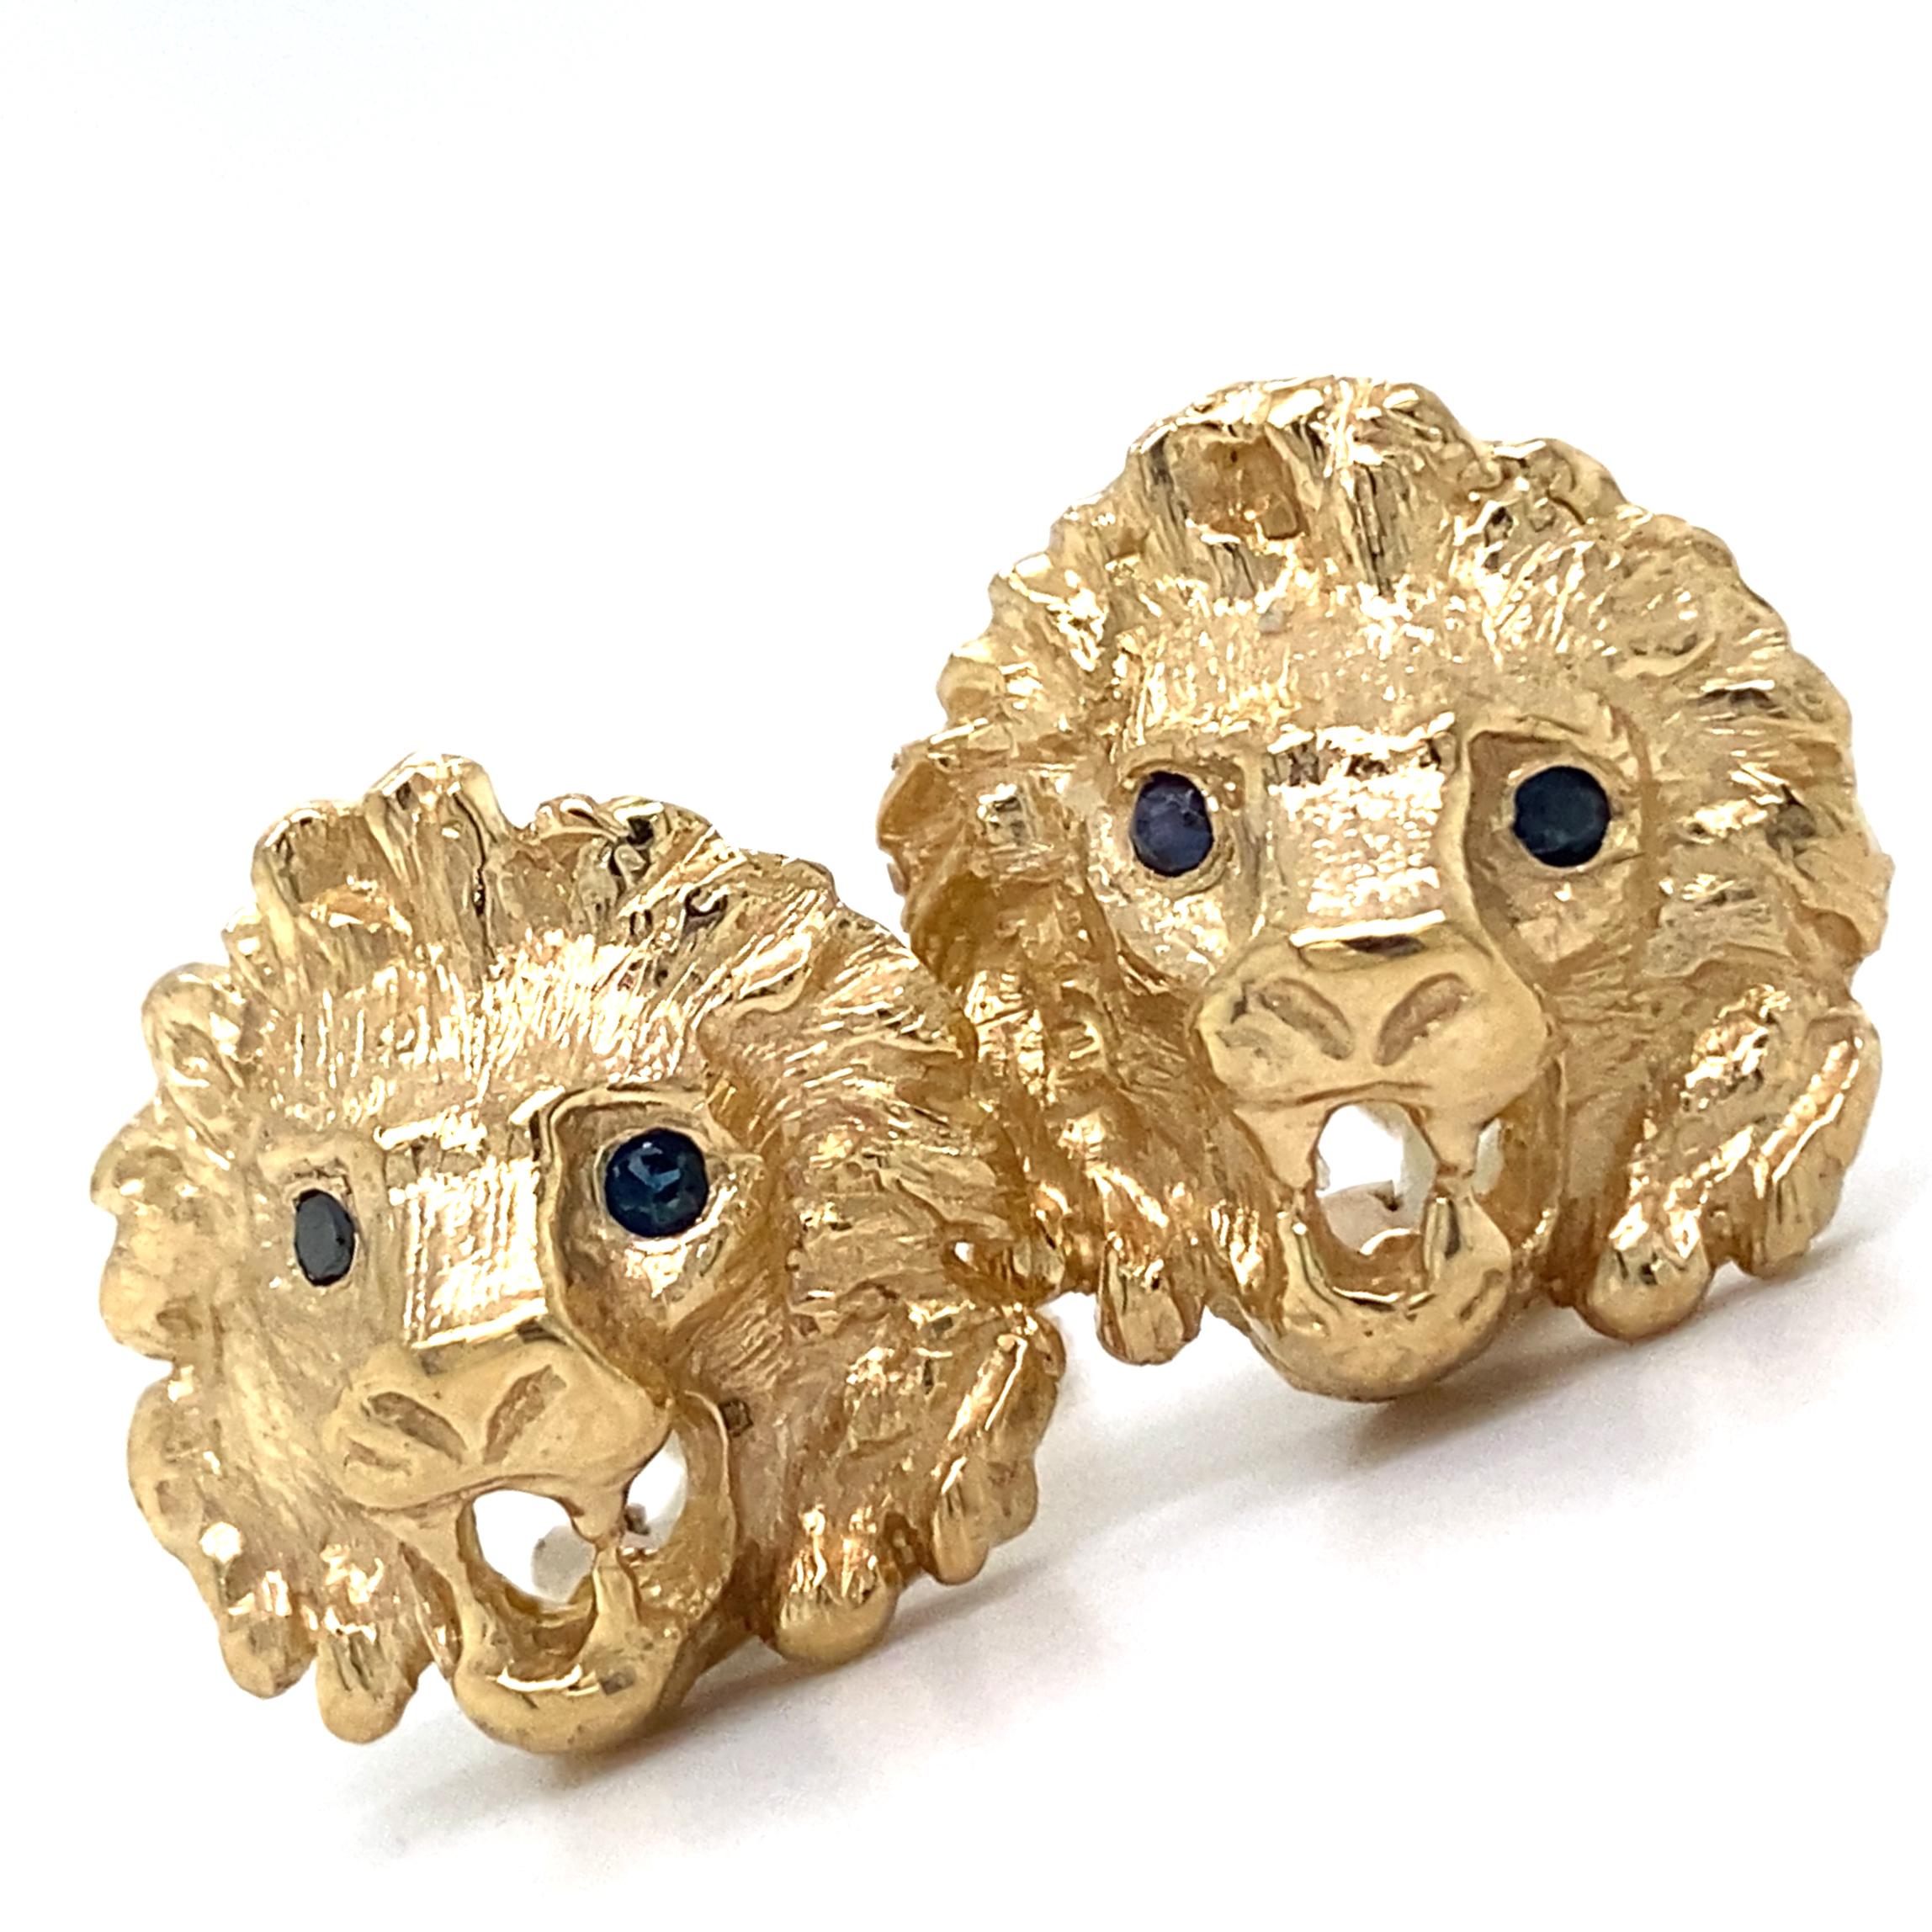 Eytan Brandes cast these ferocious lobe lions from one of our old sterling silver charm molds.  They look fabulous in shimmery 18 karat gold, and Eytan went over the surfaces by hand to add detail and definition to the big cats' faces.  The eyes are